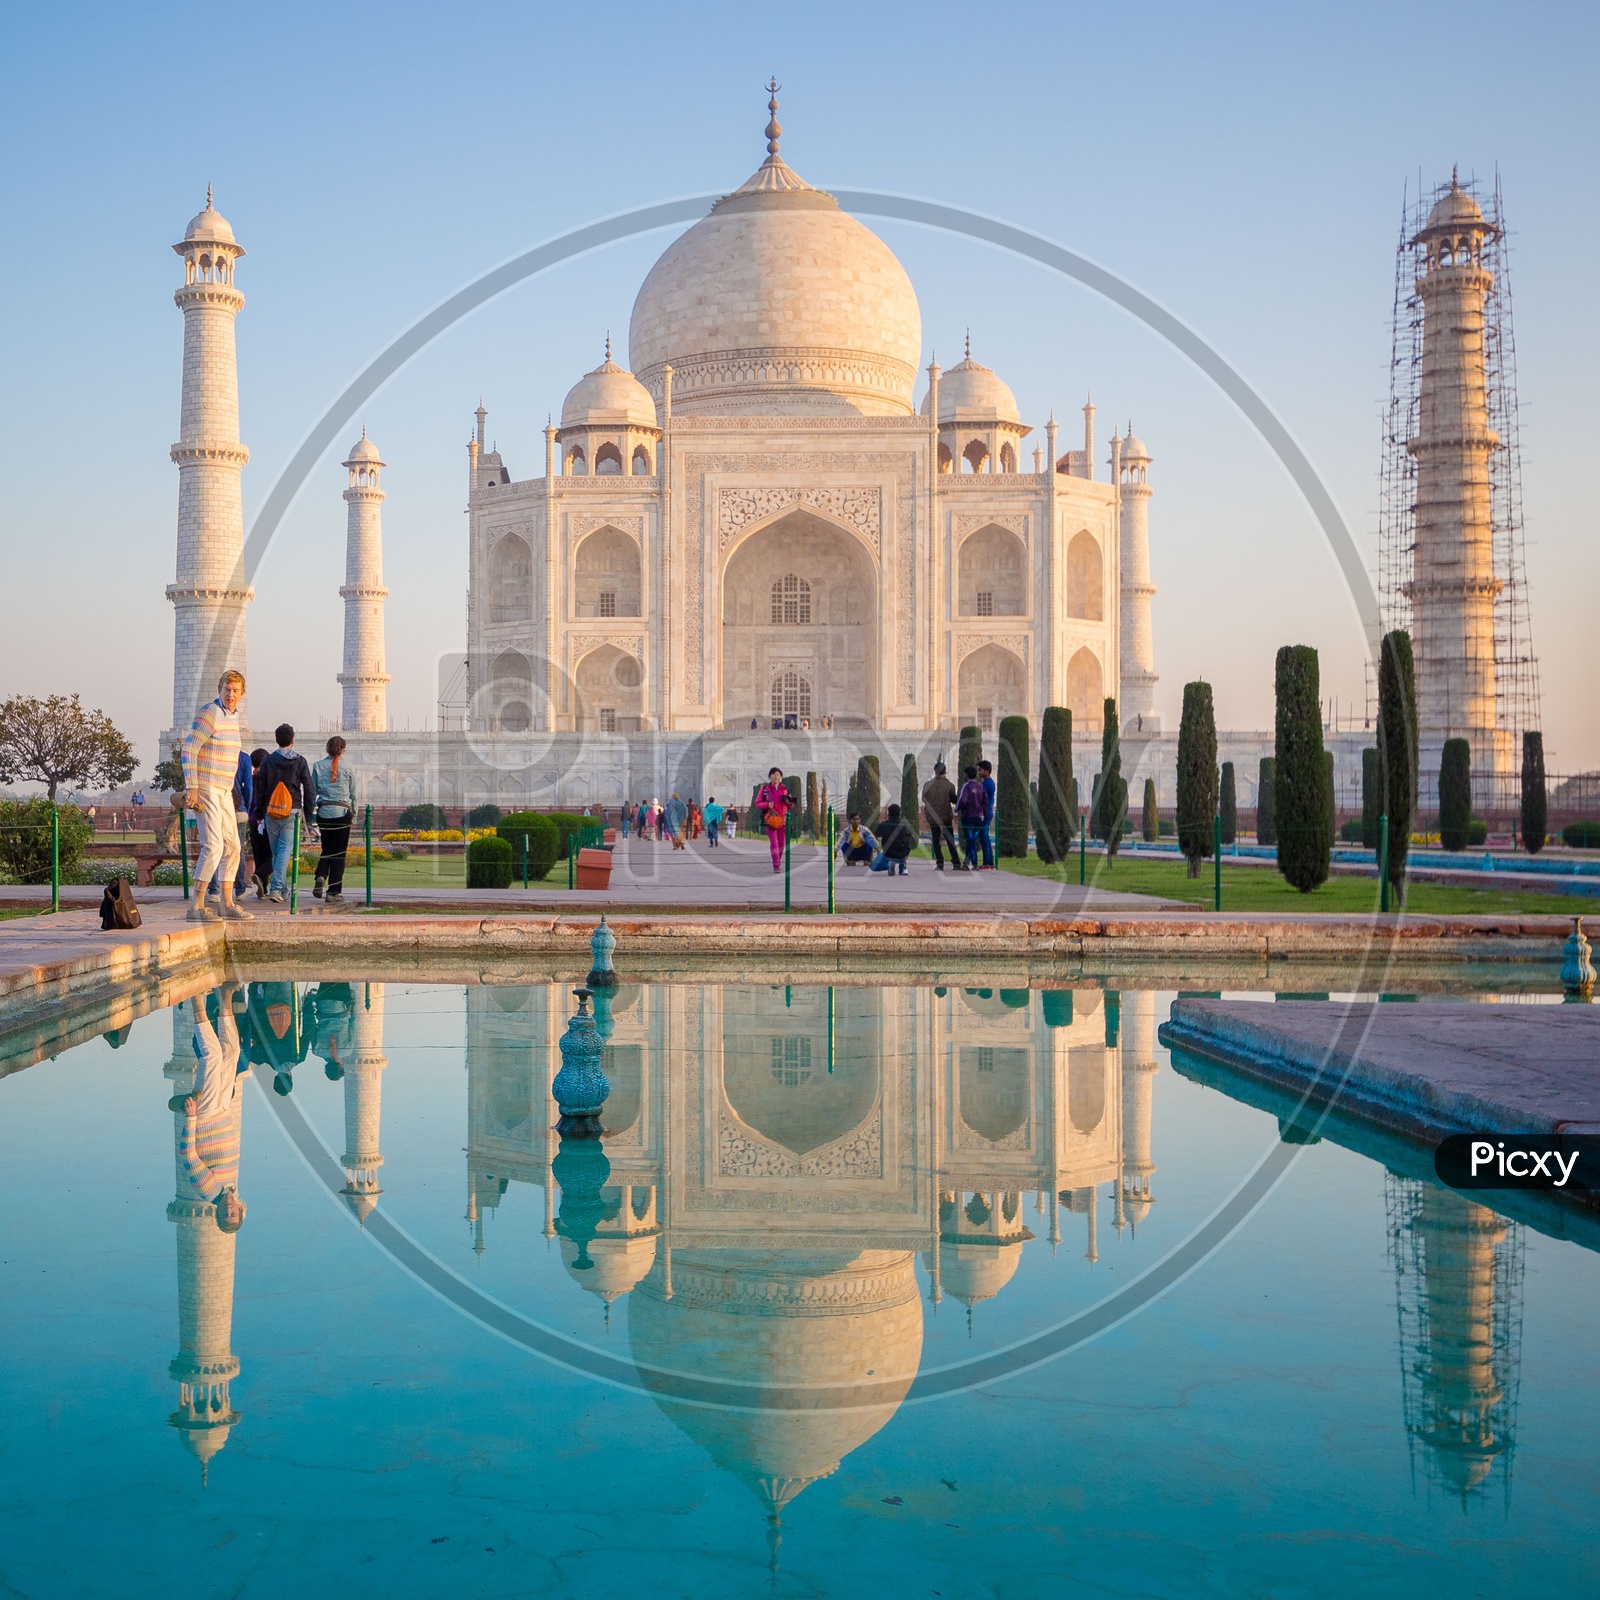 Beautiful Taj Mahal with water pond in the foreground